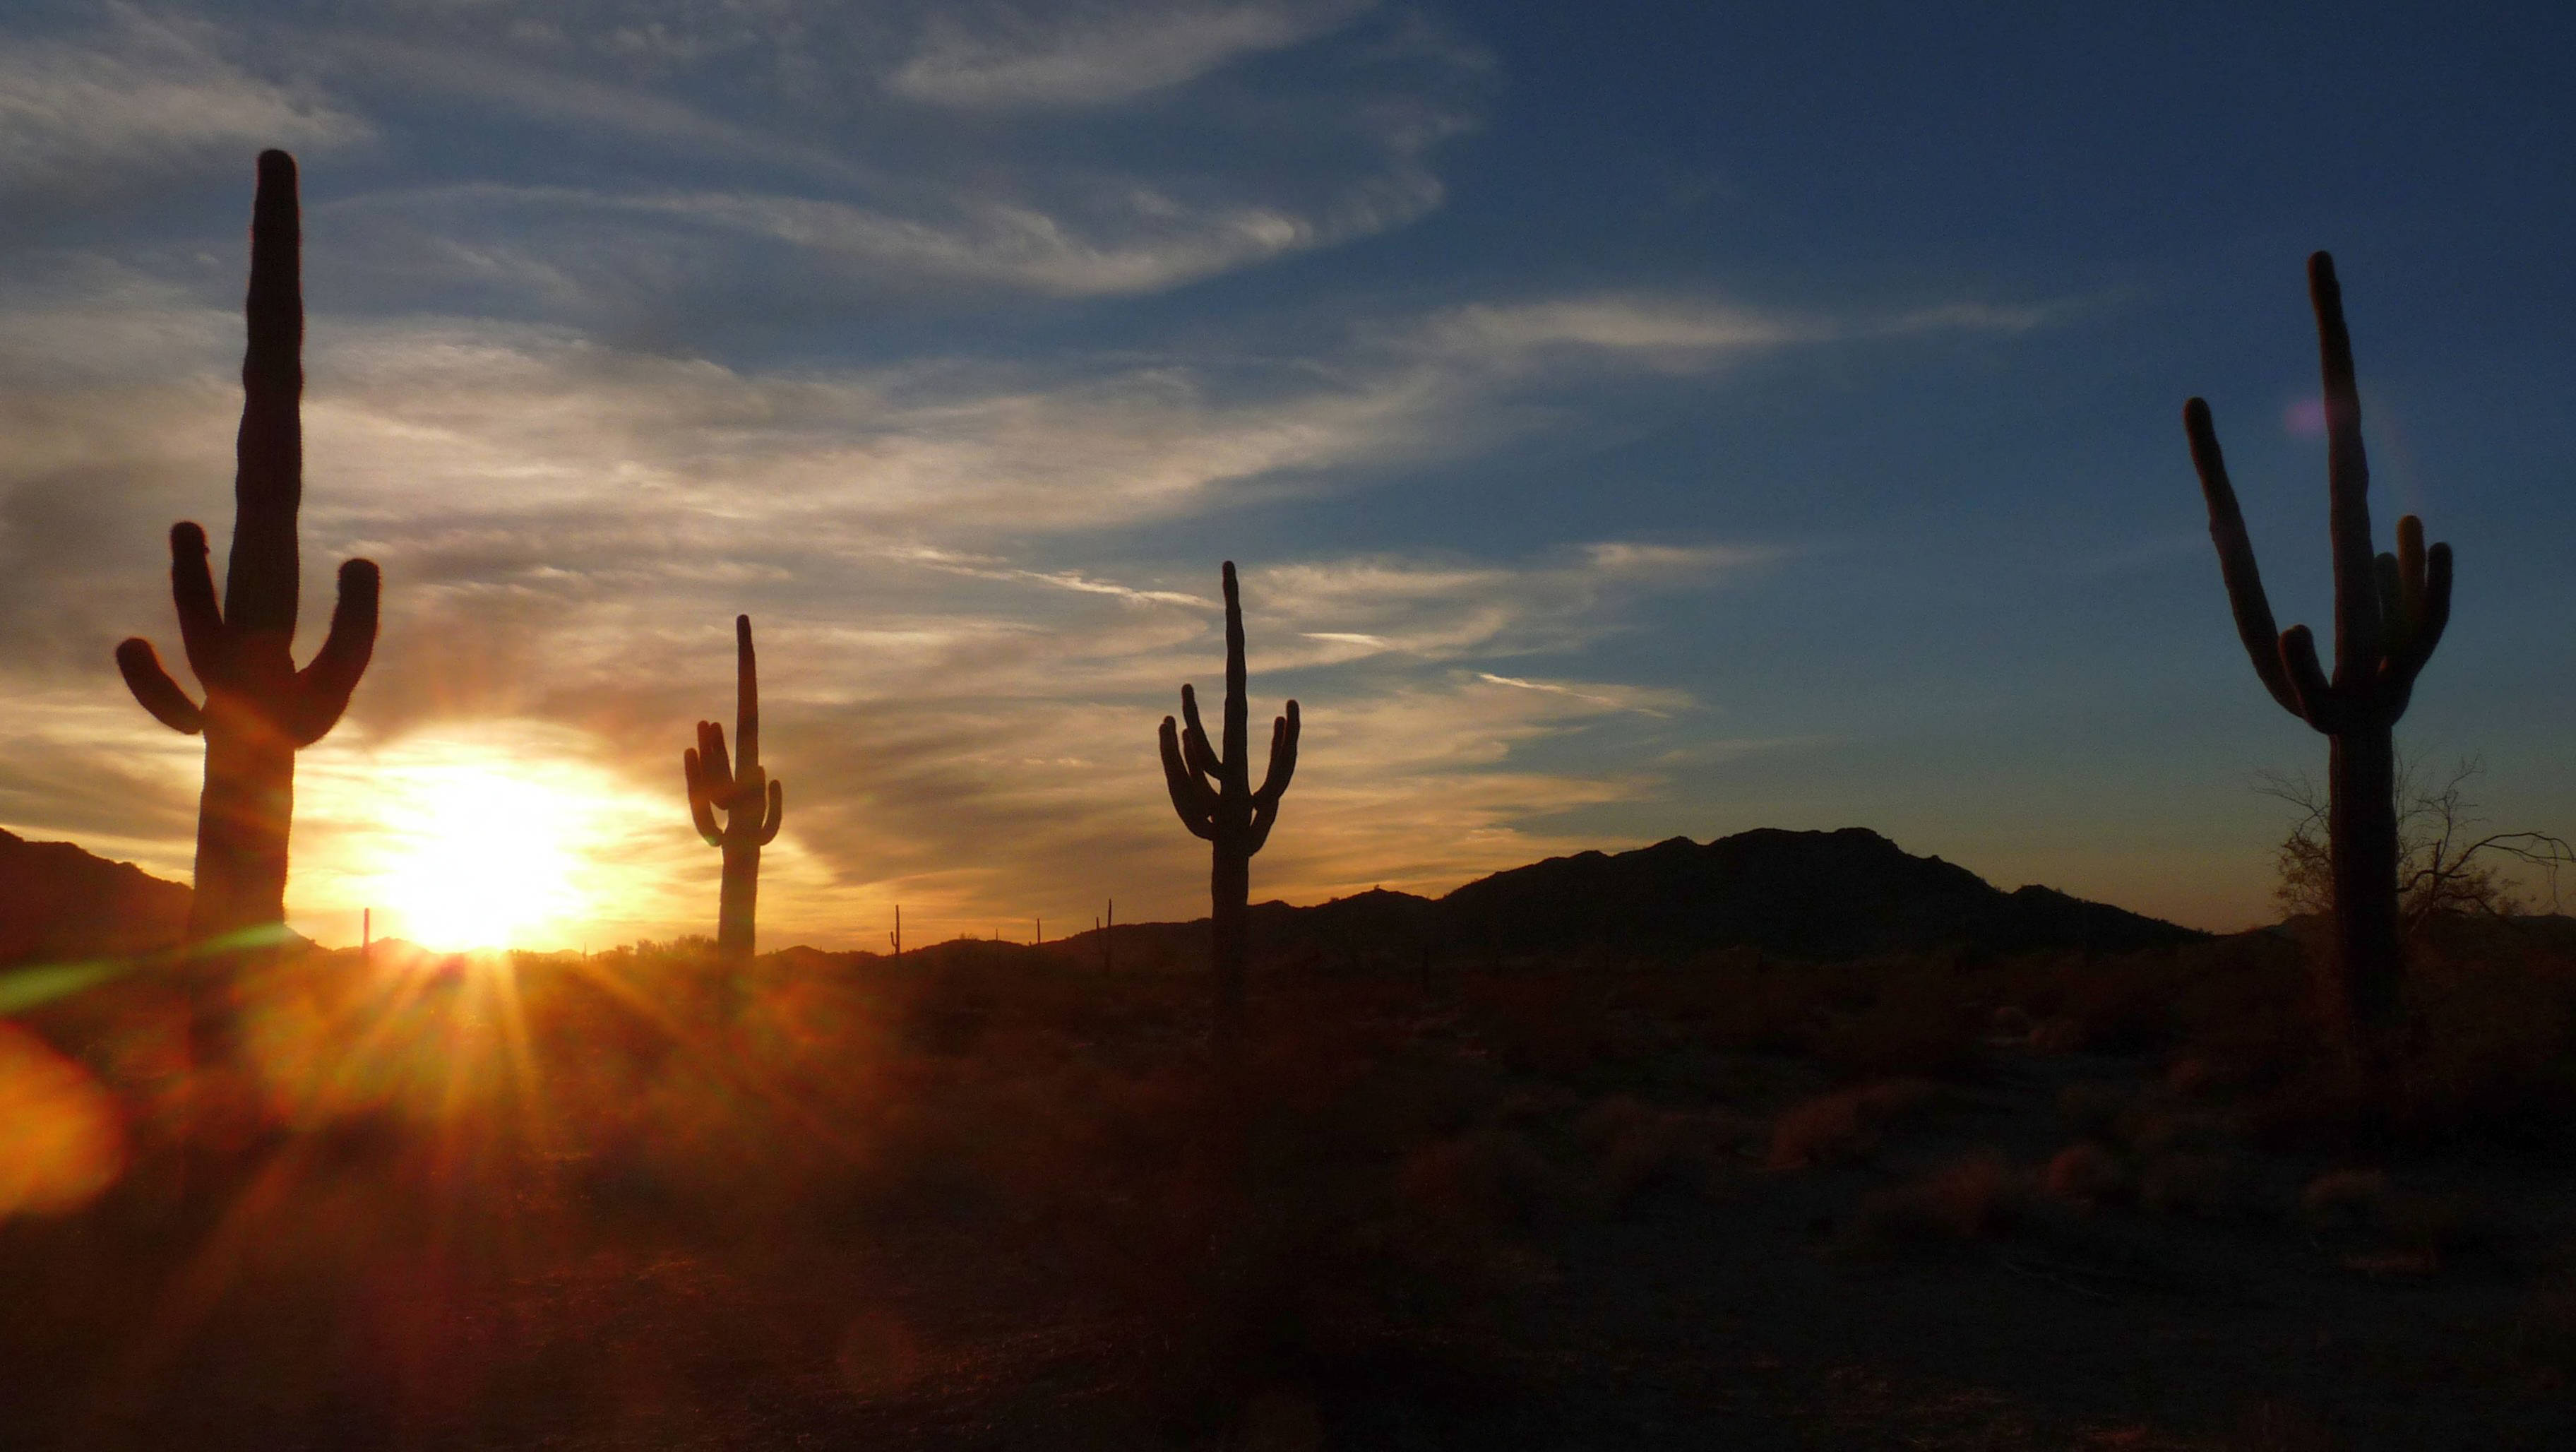 Four Saguaro cacti are shown against a bright sunset.